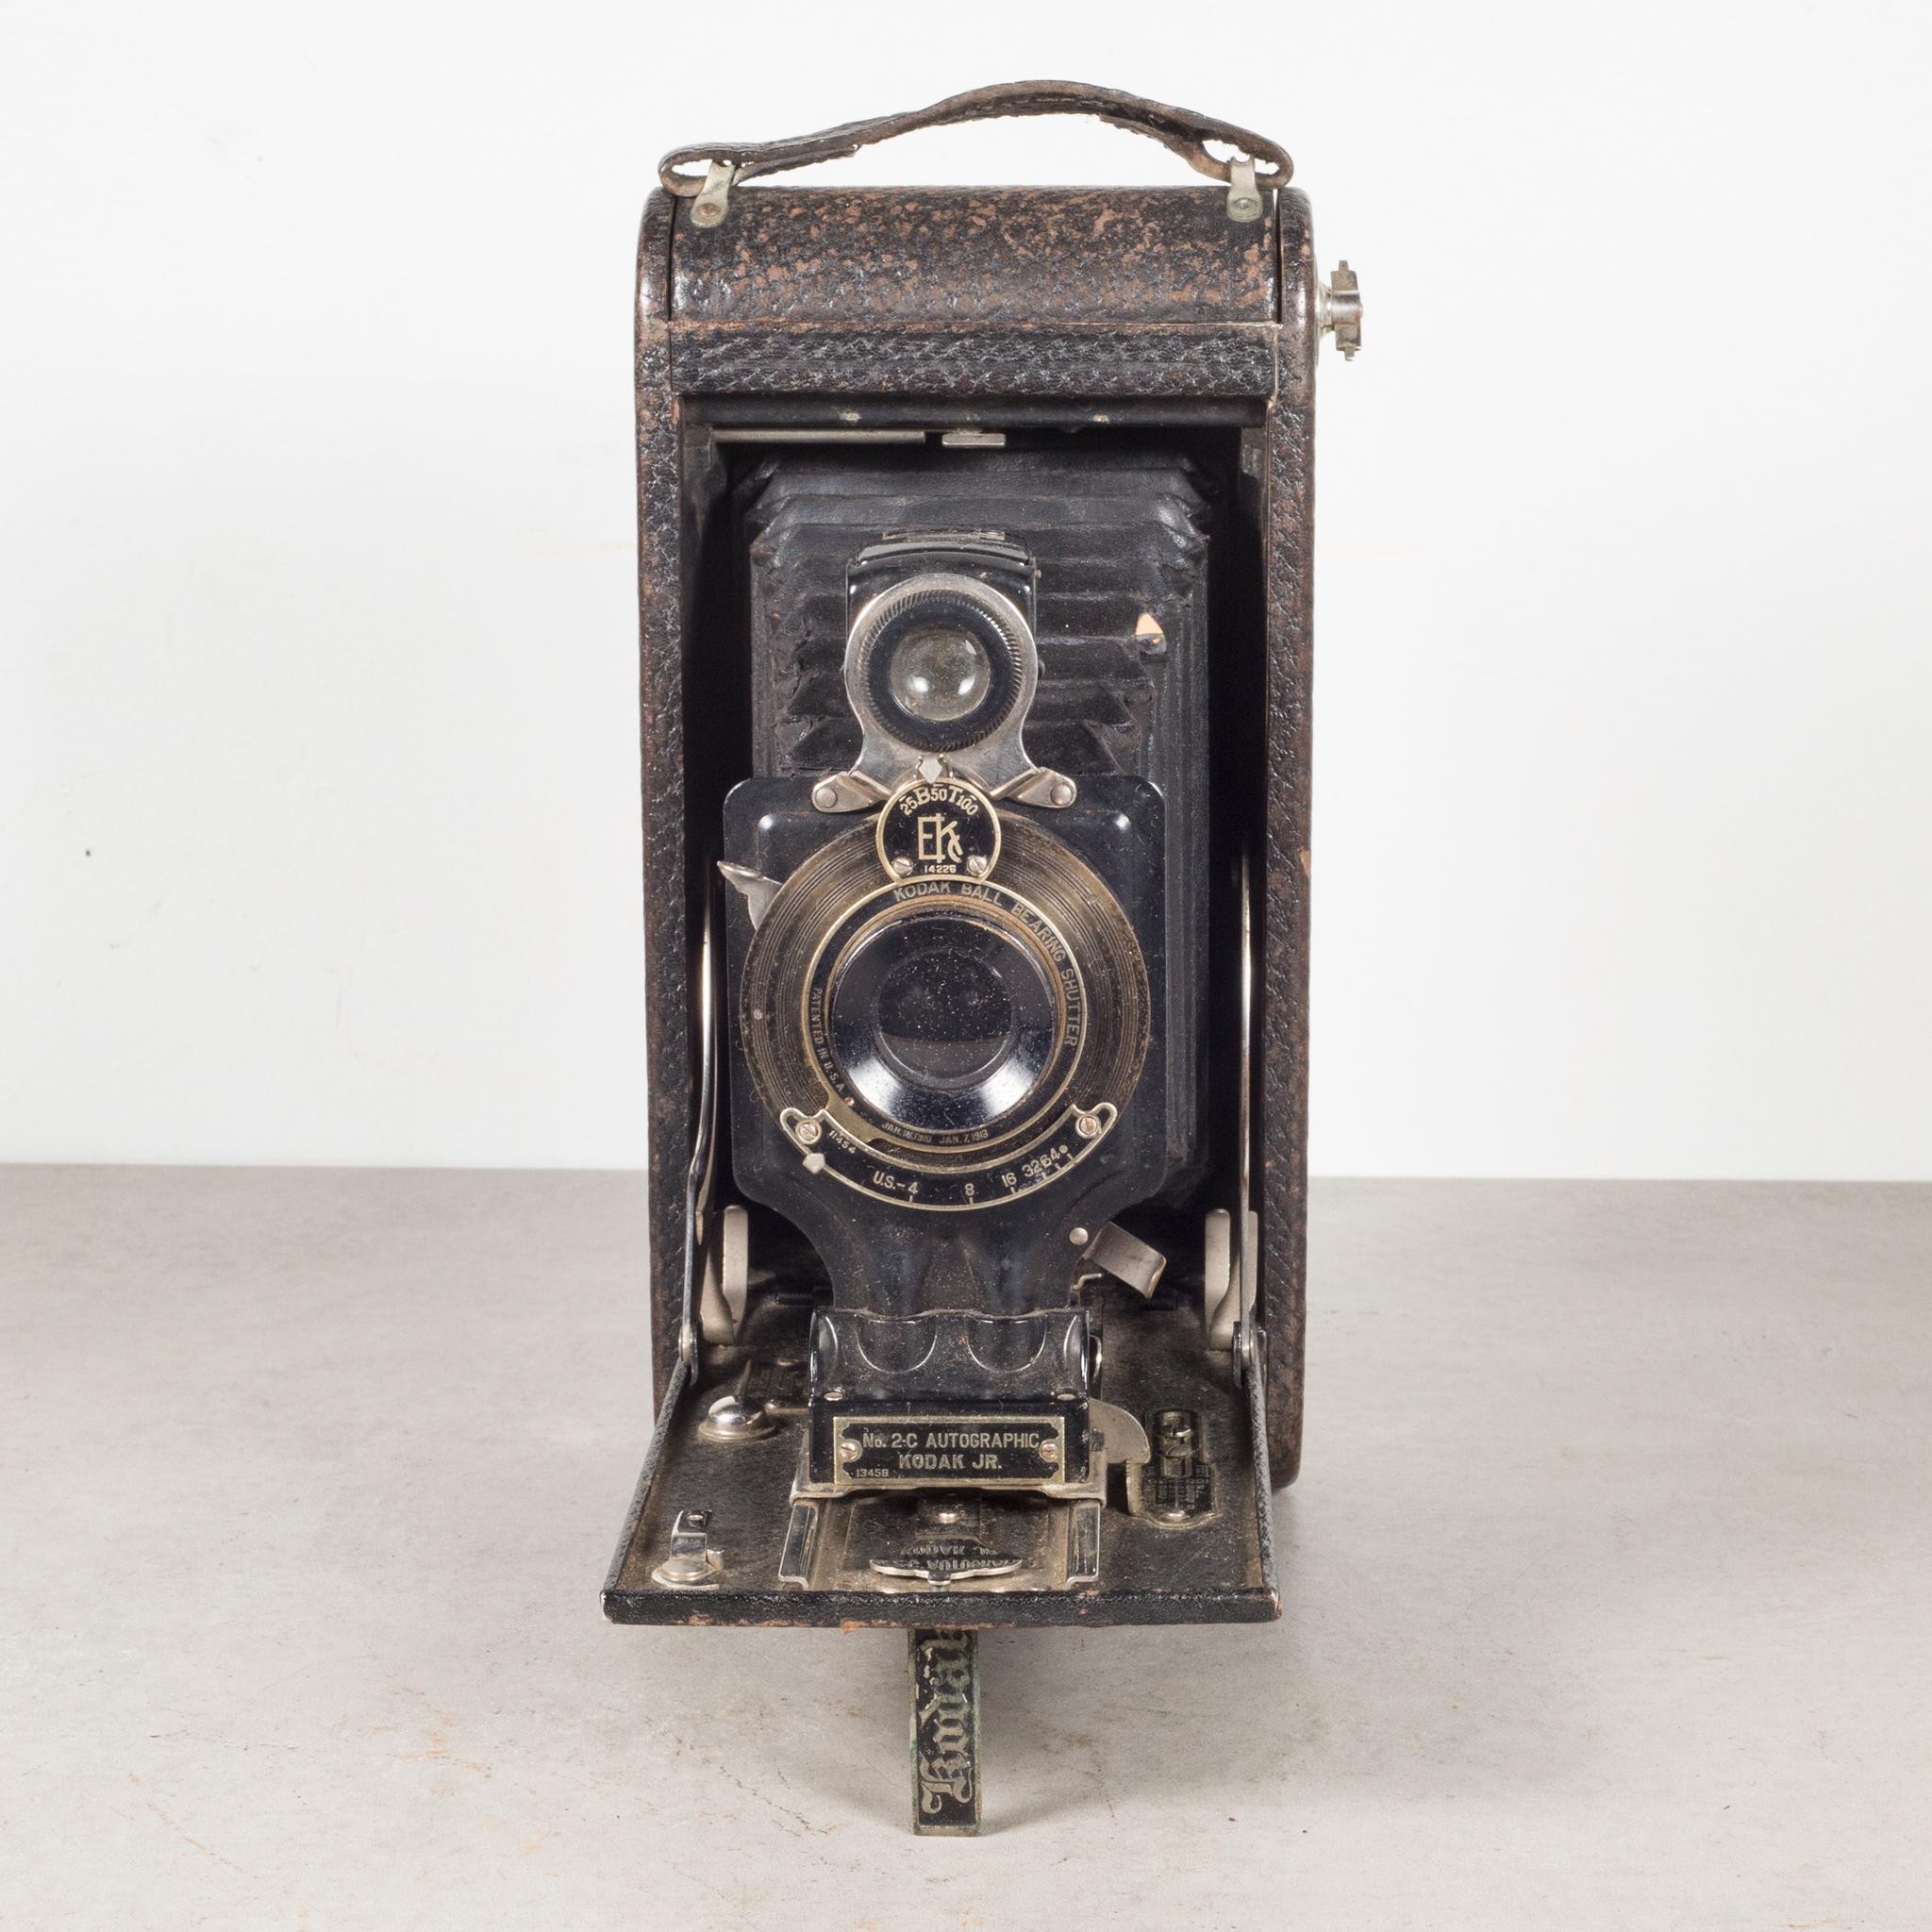 About

This is an original Eastman Kodak No. 2C Jr. folding camera. The body of camera is all leather with a pop out view finder and it folds smoothly closed to 2 inches. This camera has retained its original finish and has the appropriate amount